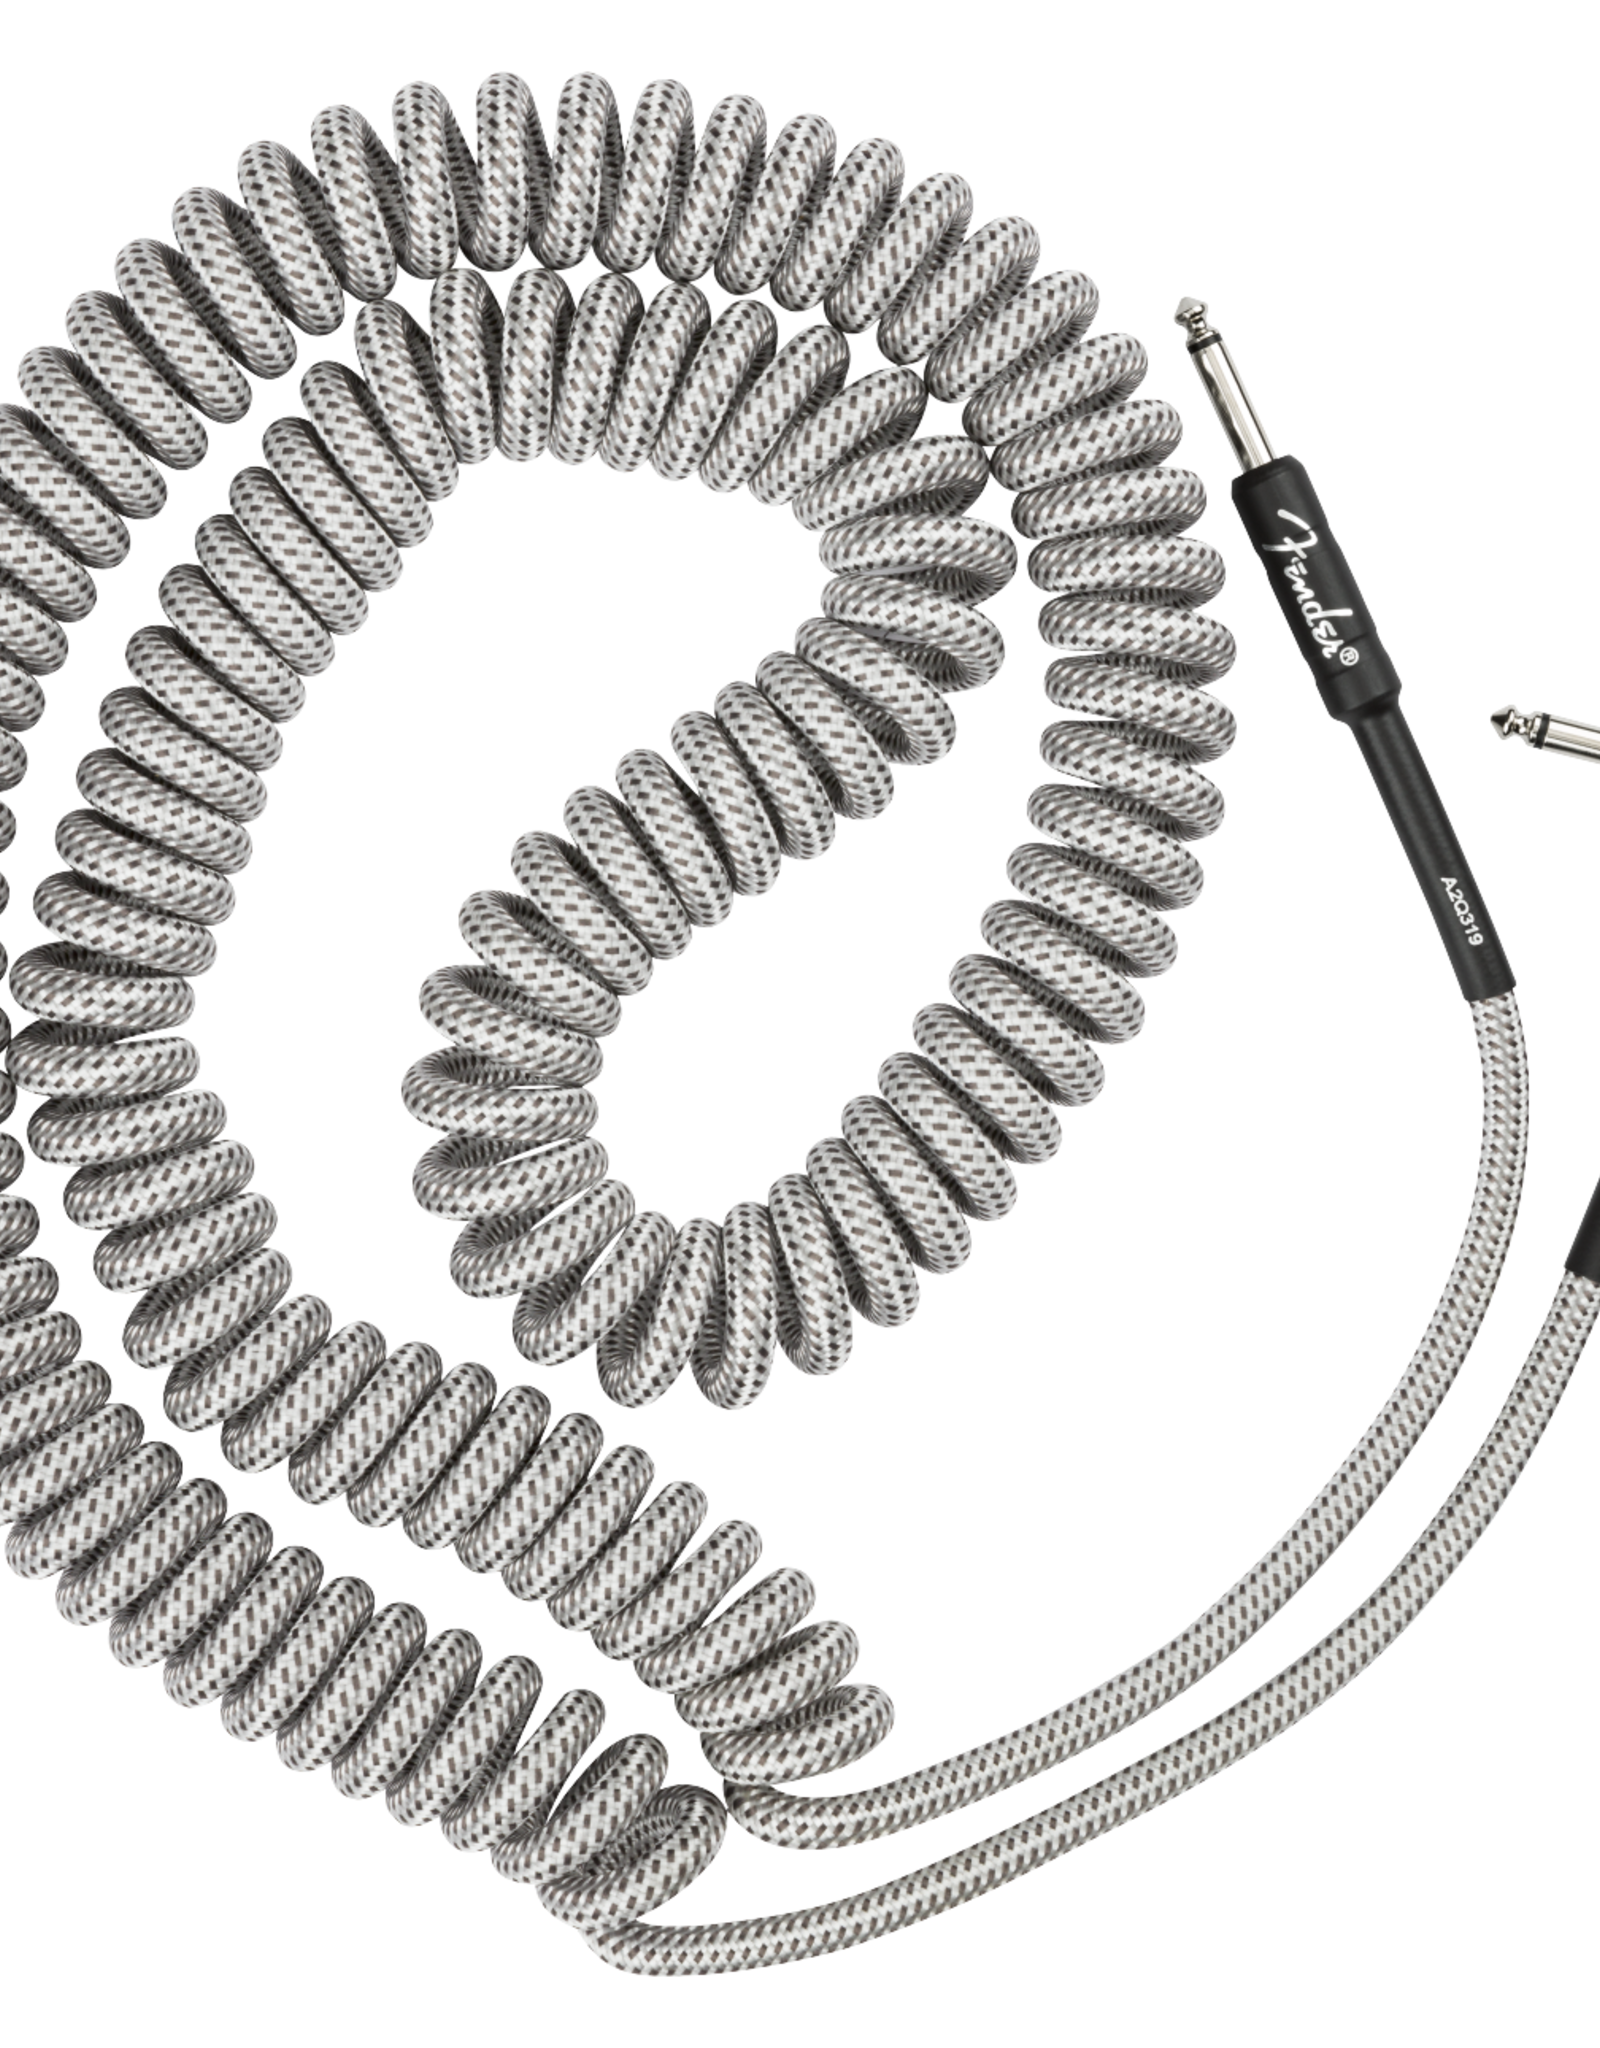 Fender Fender Professional Coil Cable, 30', White Tweed